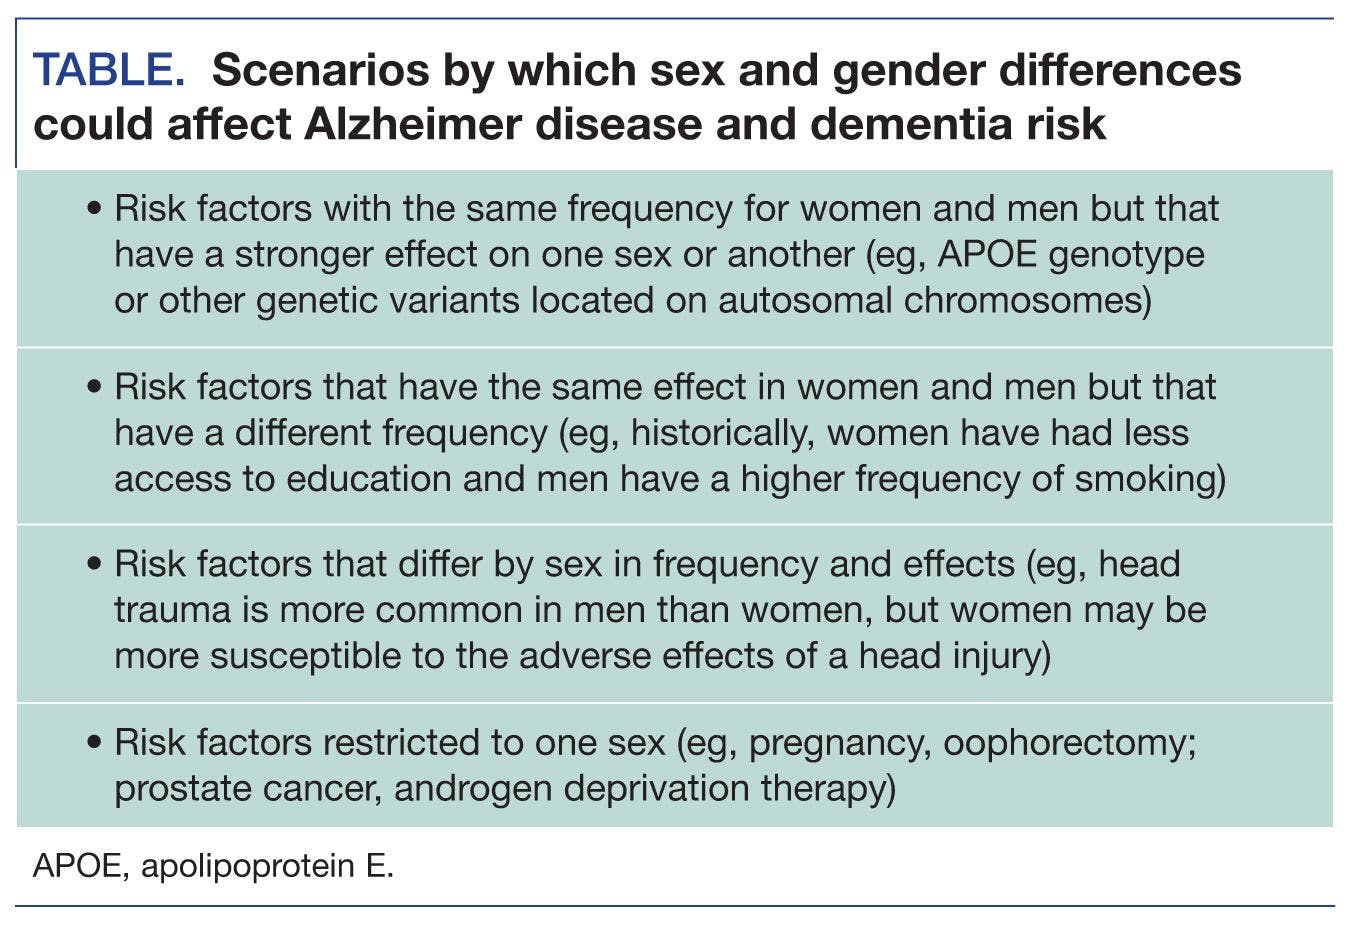 Scenarios by which sex and gender differences could affect Alzheimer disease and dementia risk